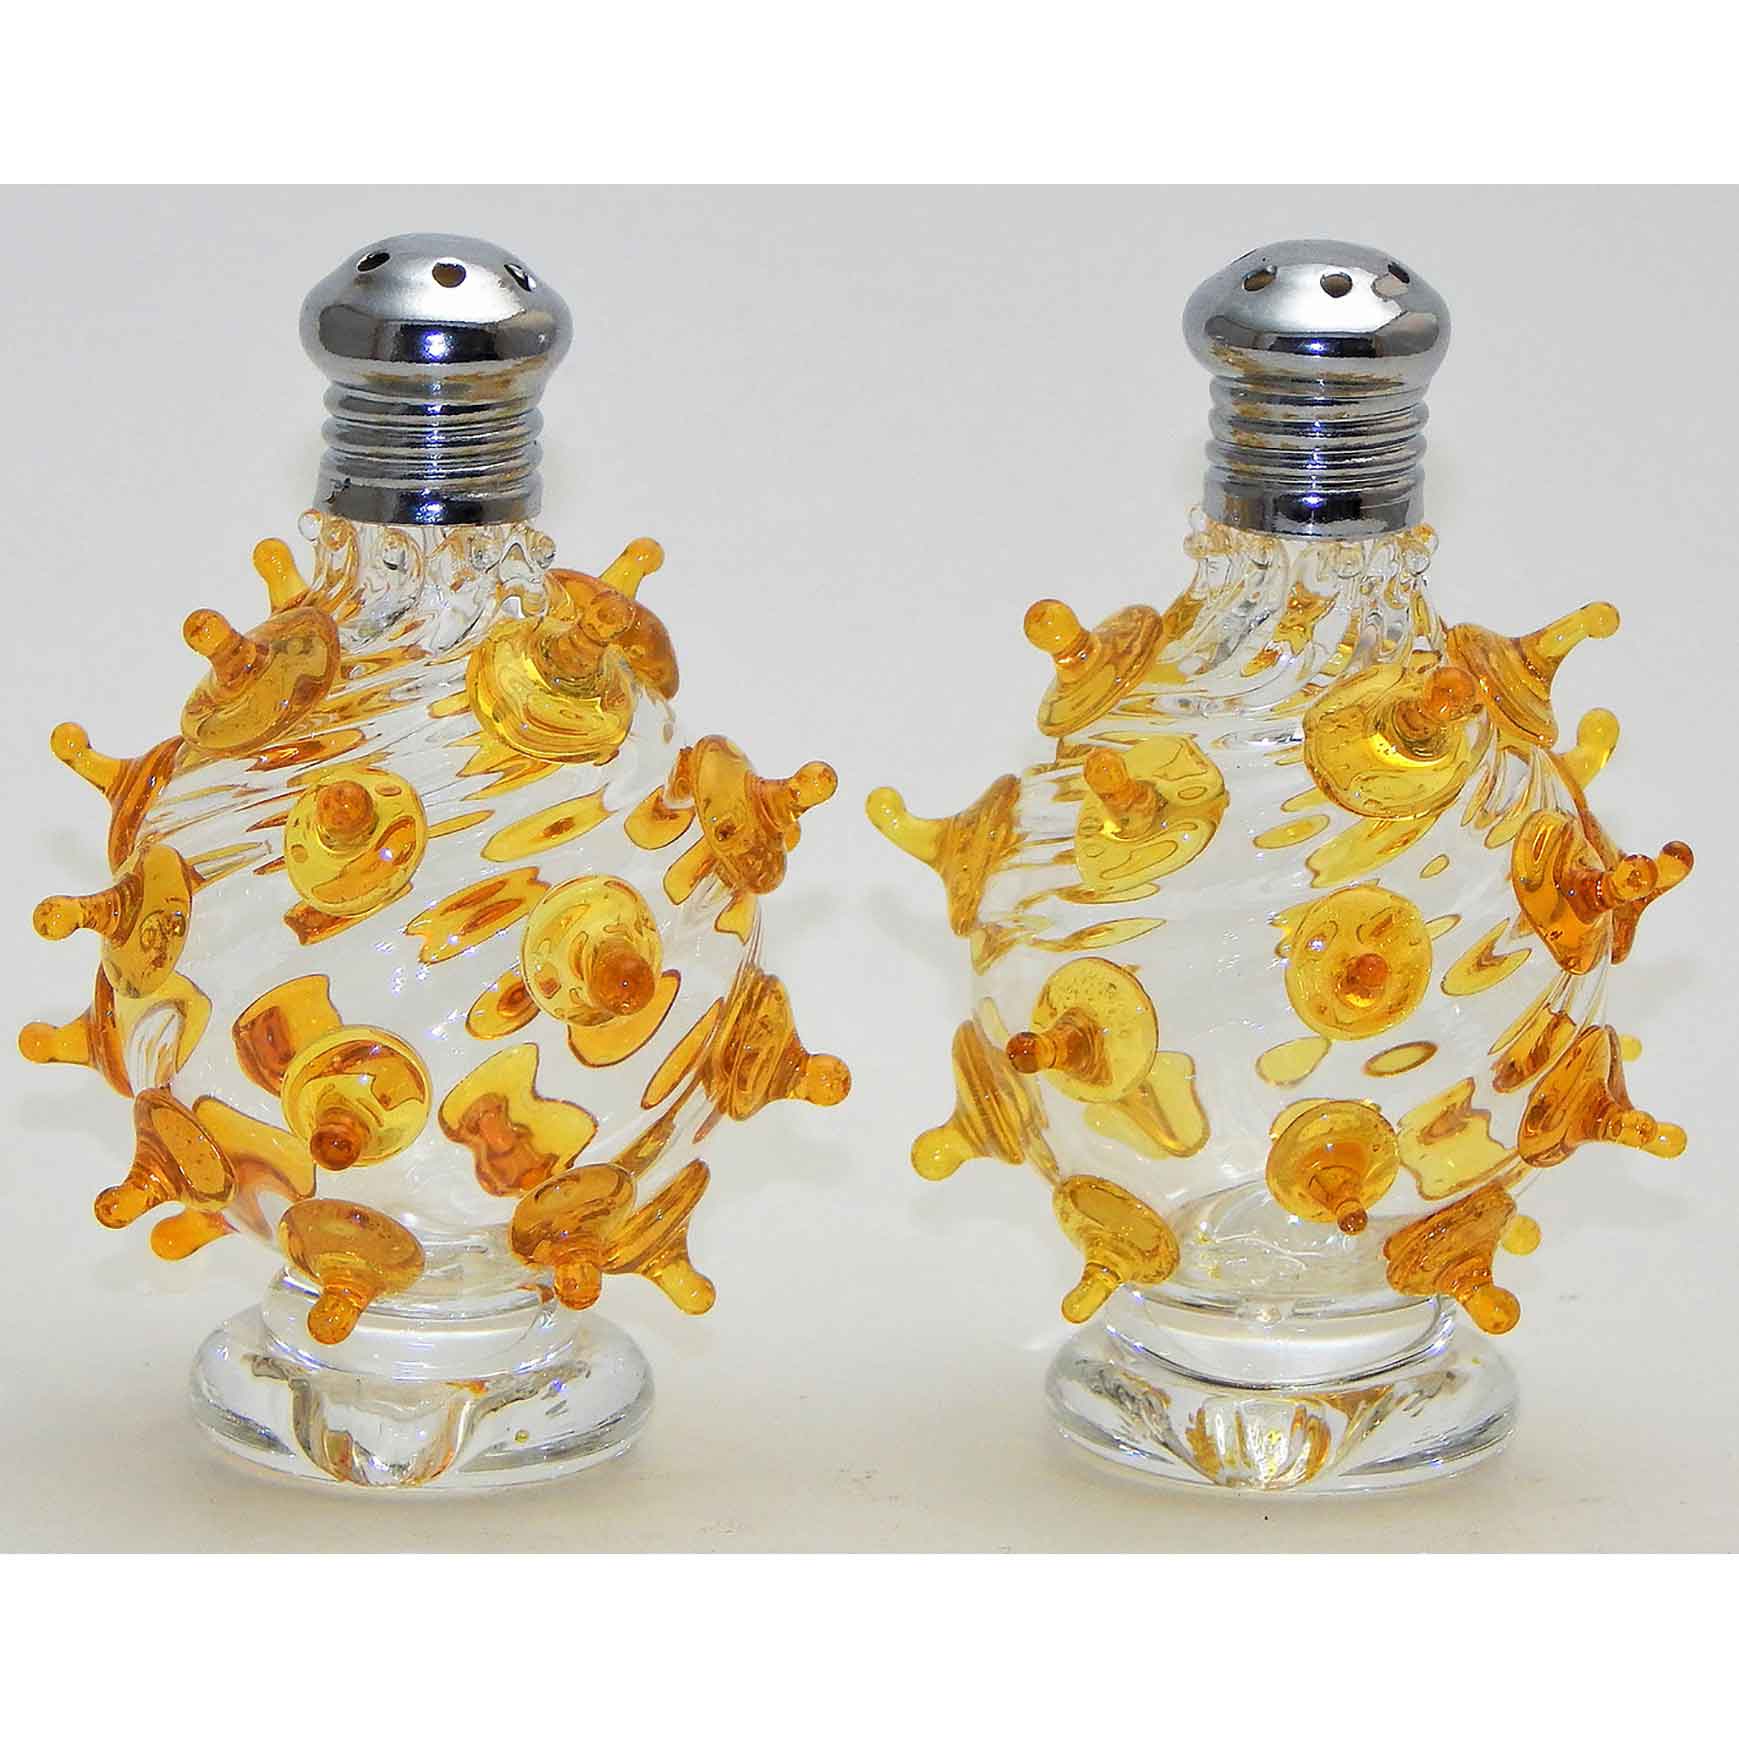 Yellow Poking Ball Blown Glass Salt and Pepper Shaker 200 by Four Sisters Art Glass